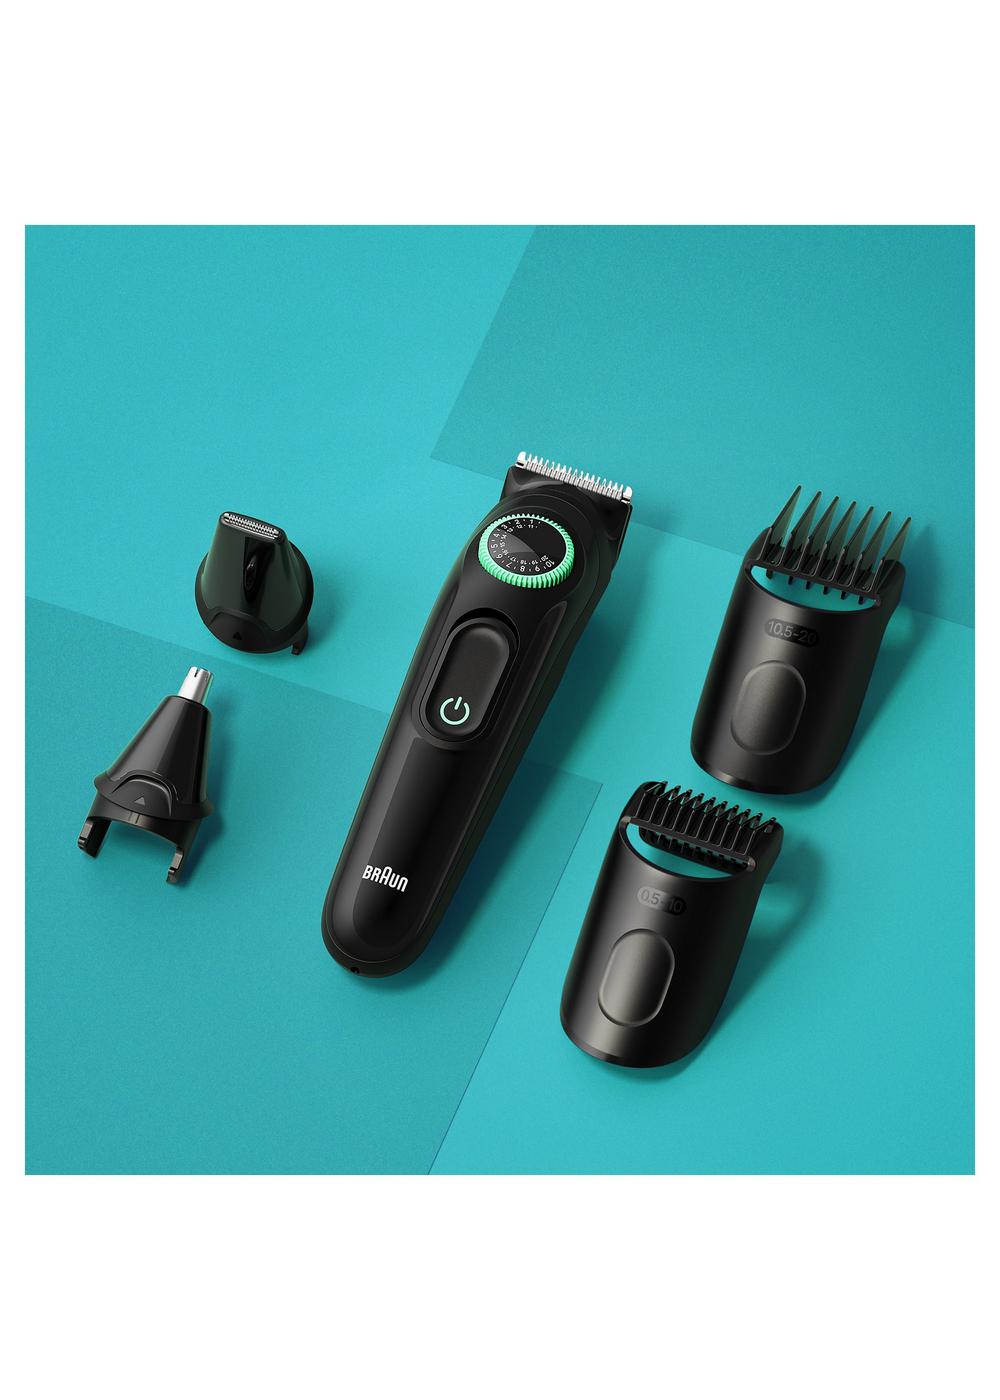 Braun Braun All-In-One Style Kit Series 3 3450, 5-in-1 Trimmer for